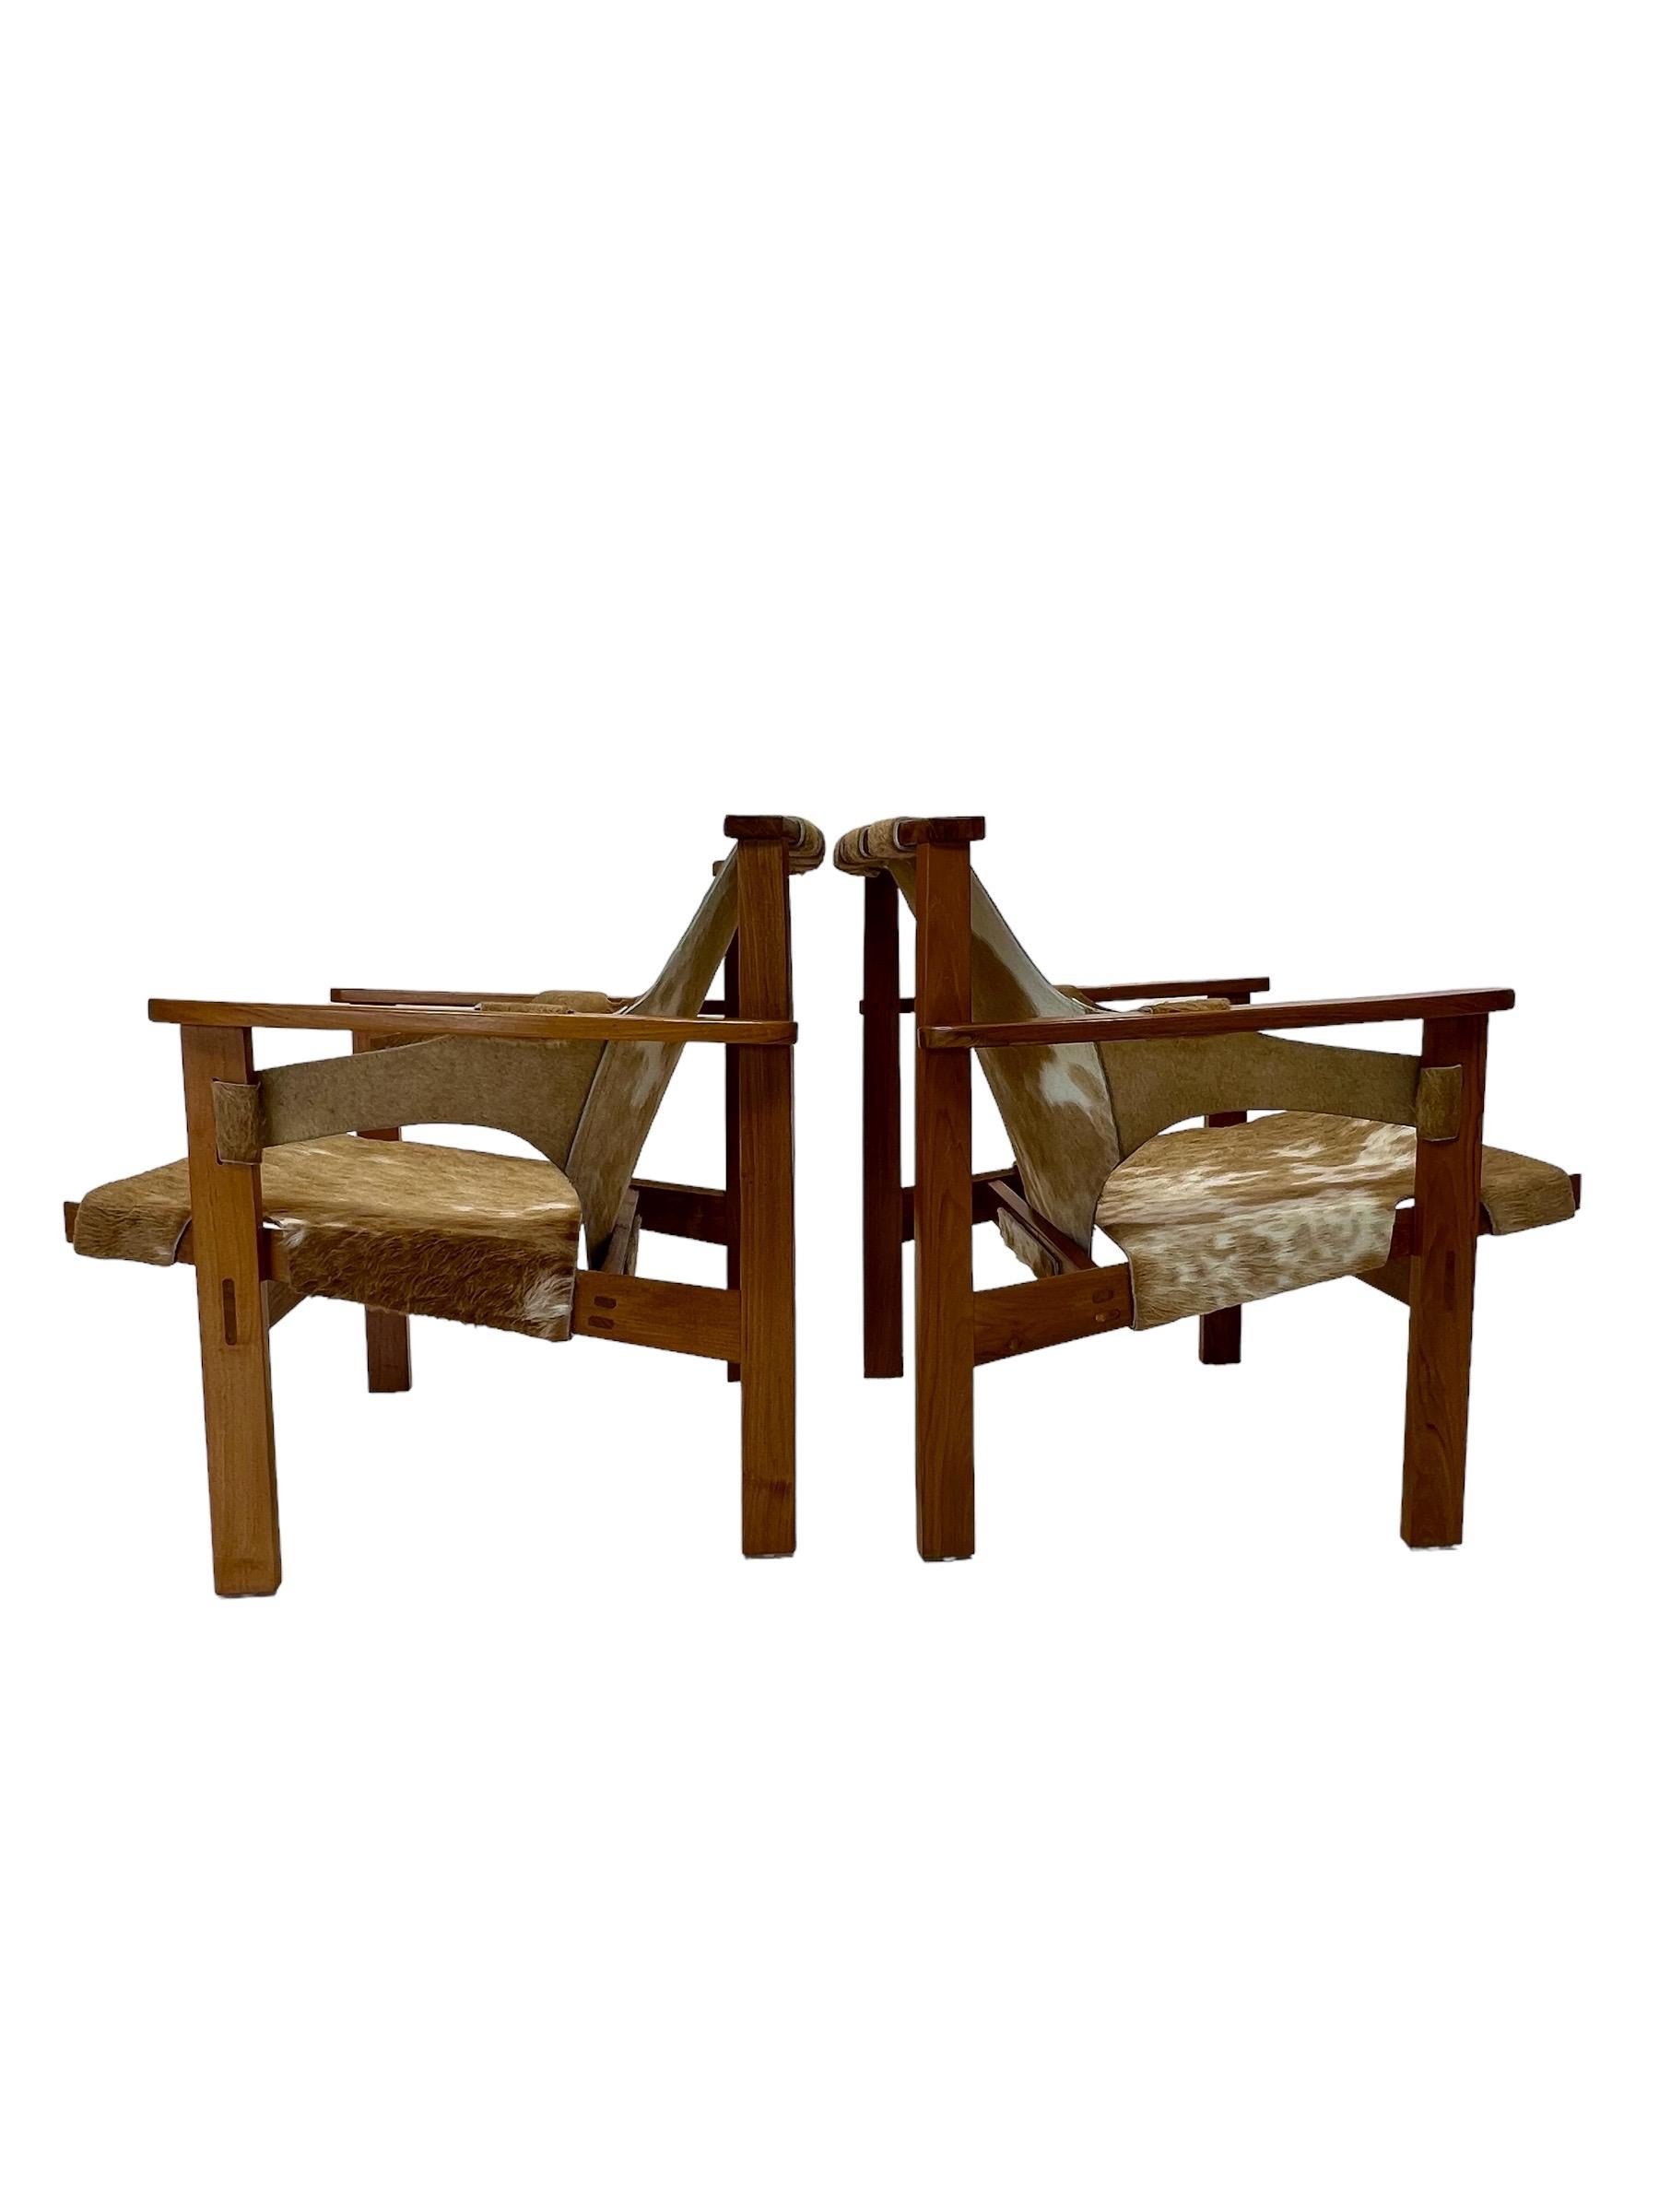 Mid-20th Century Carl Axel Acking Trienna Lounge Chairs in Brazilian Cowhide For Sale